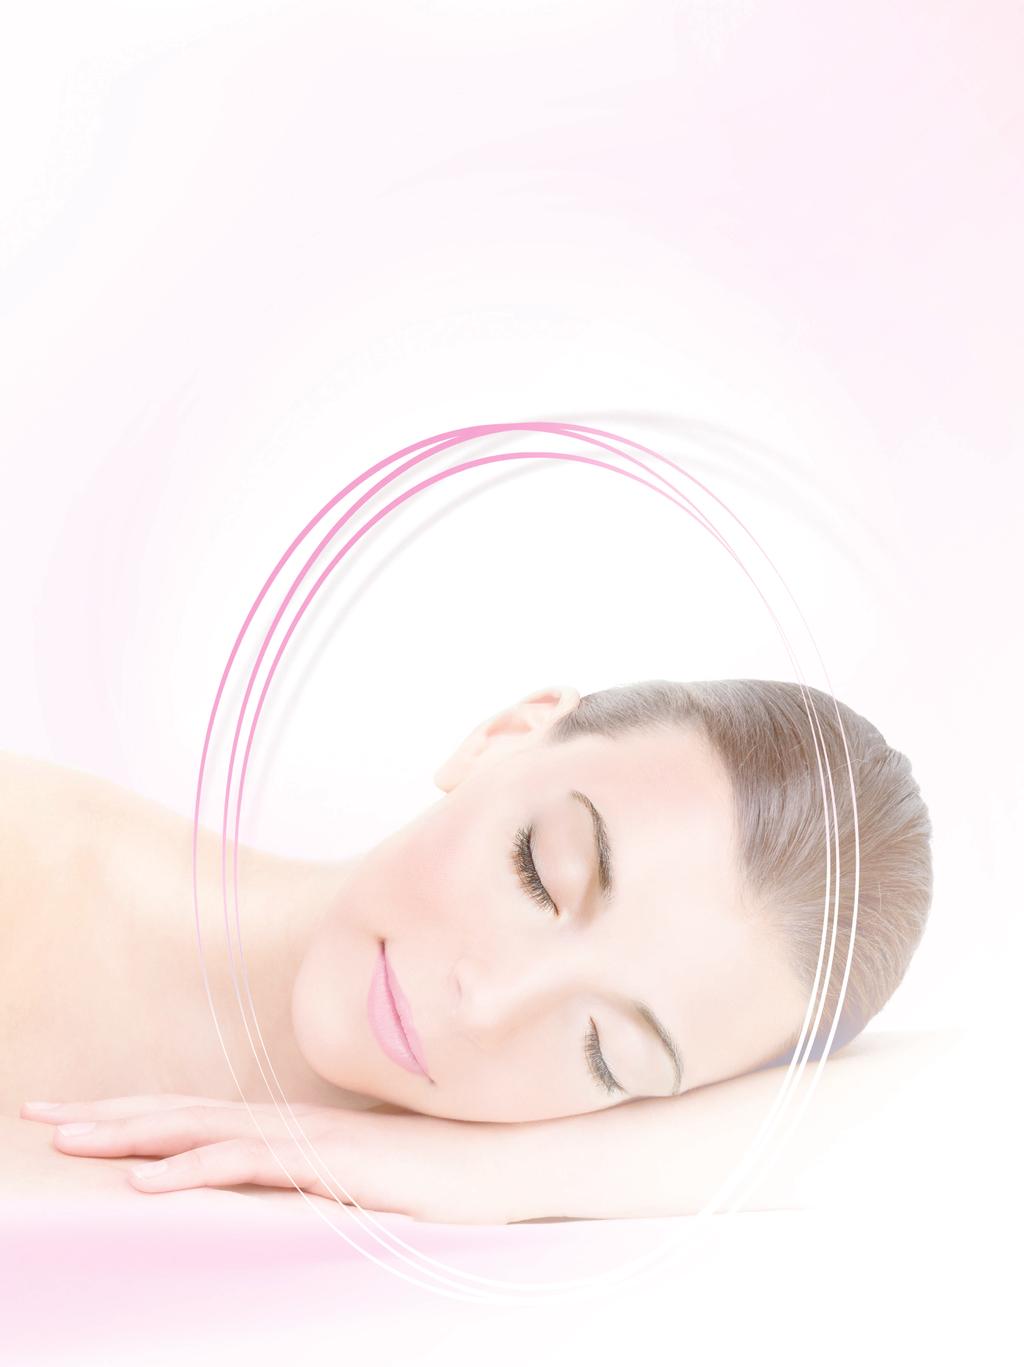 Anti-ageing Premium Expert Facial The ultimate in skin rejuvenation - this 'highly specialised' facial draws on Gatineau's extensive anti-ageing experience and combats all the global signs of ageing.